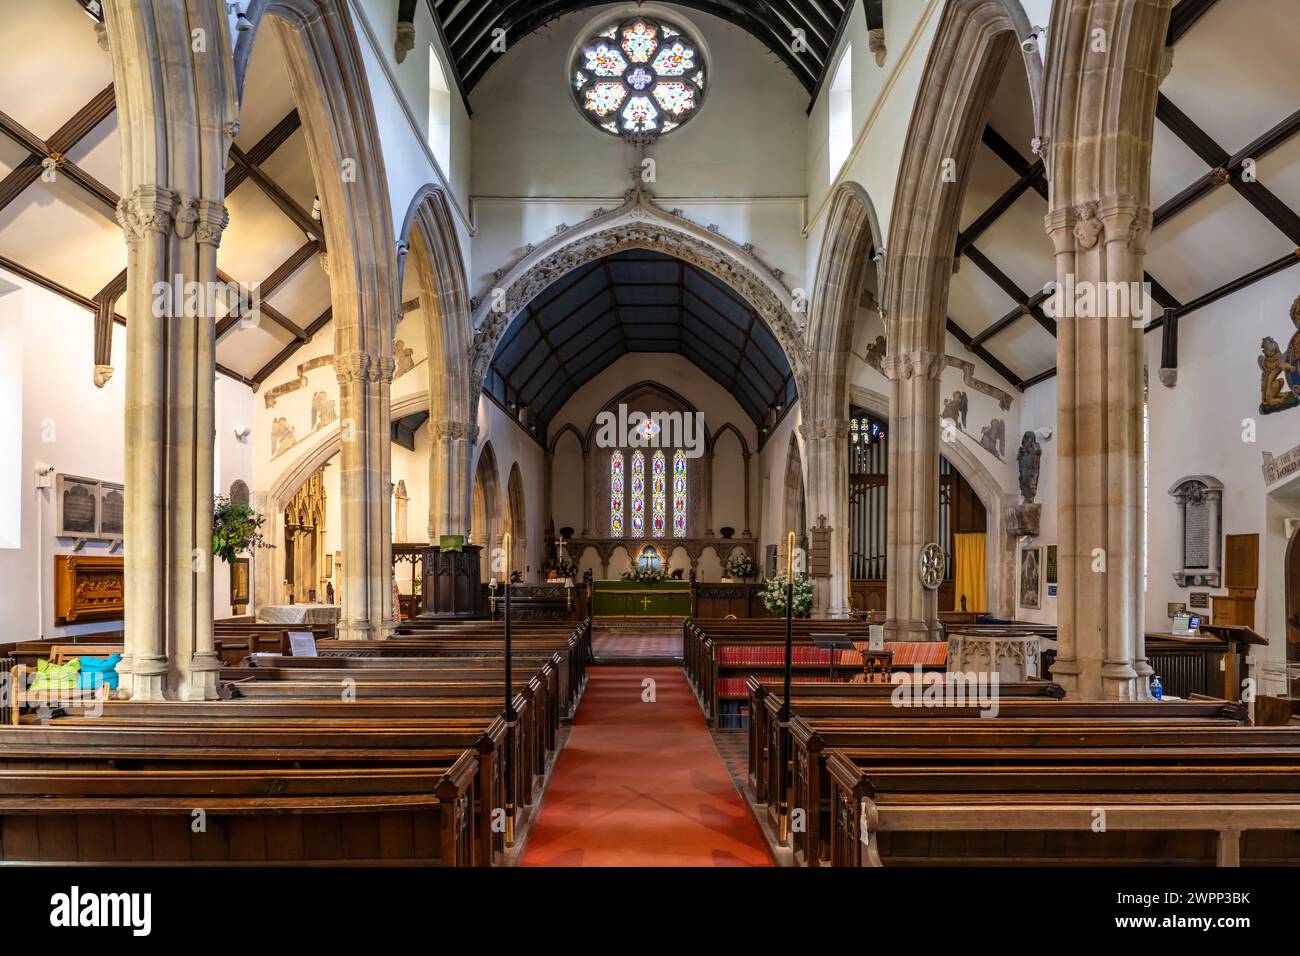 Interior of St. Andrew's Church, Castle Combe, Cotswolds, Wiltshire, England, Great Britain, Europe Stock Photo